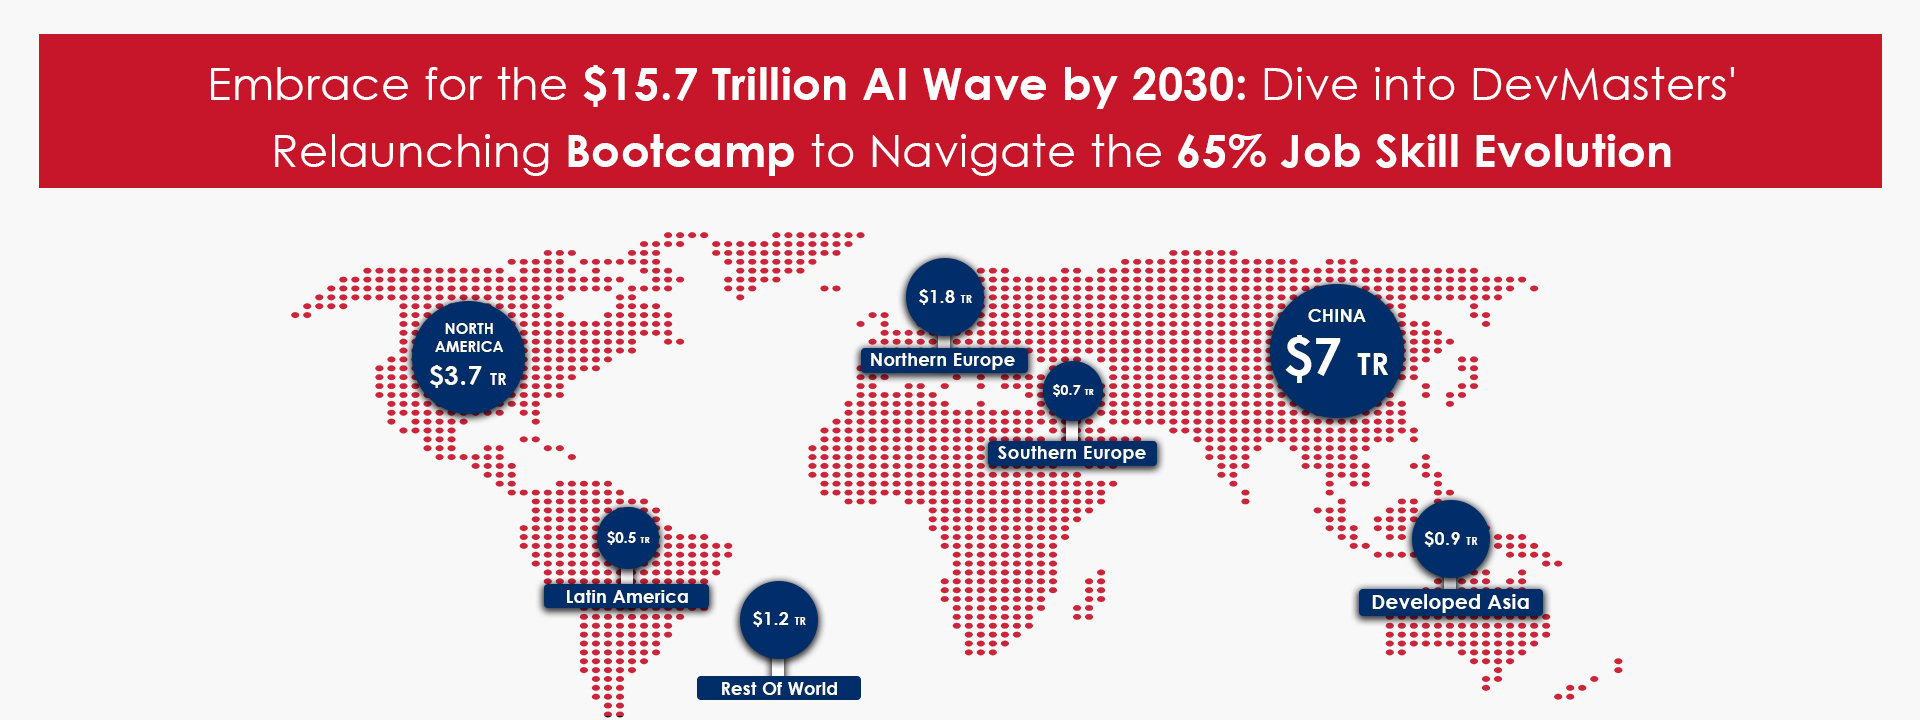 Prepare for the AI Surge DevMasters Relaunch Bootcamp Equips You for the $15.7 Trillion Revolution and the 65% Job Skill Shift by